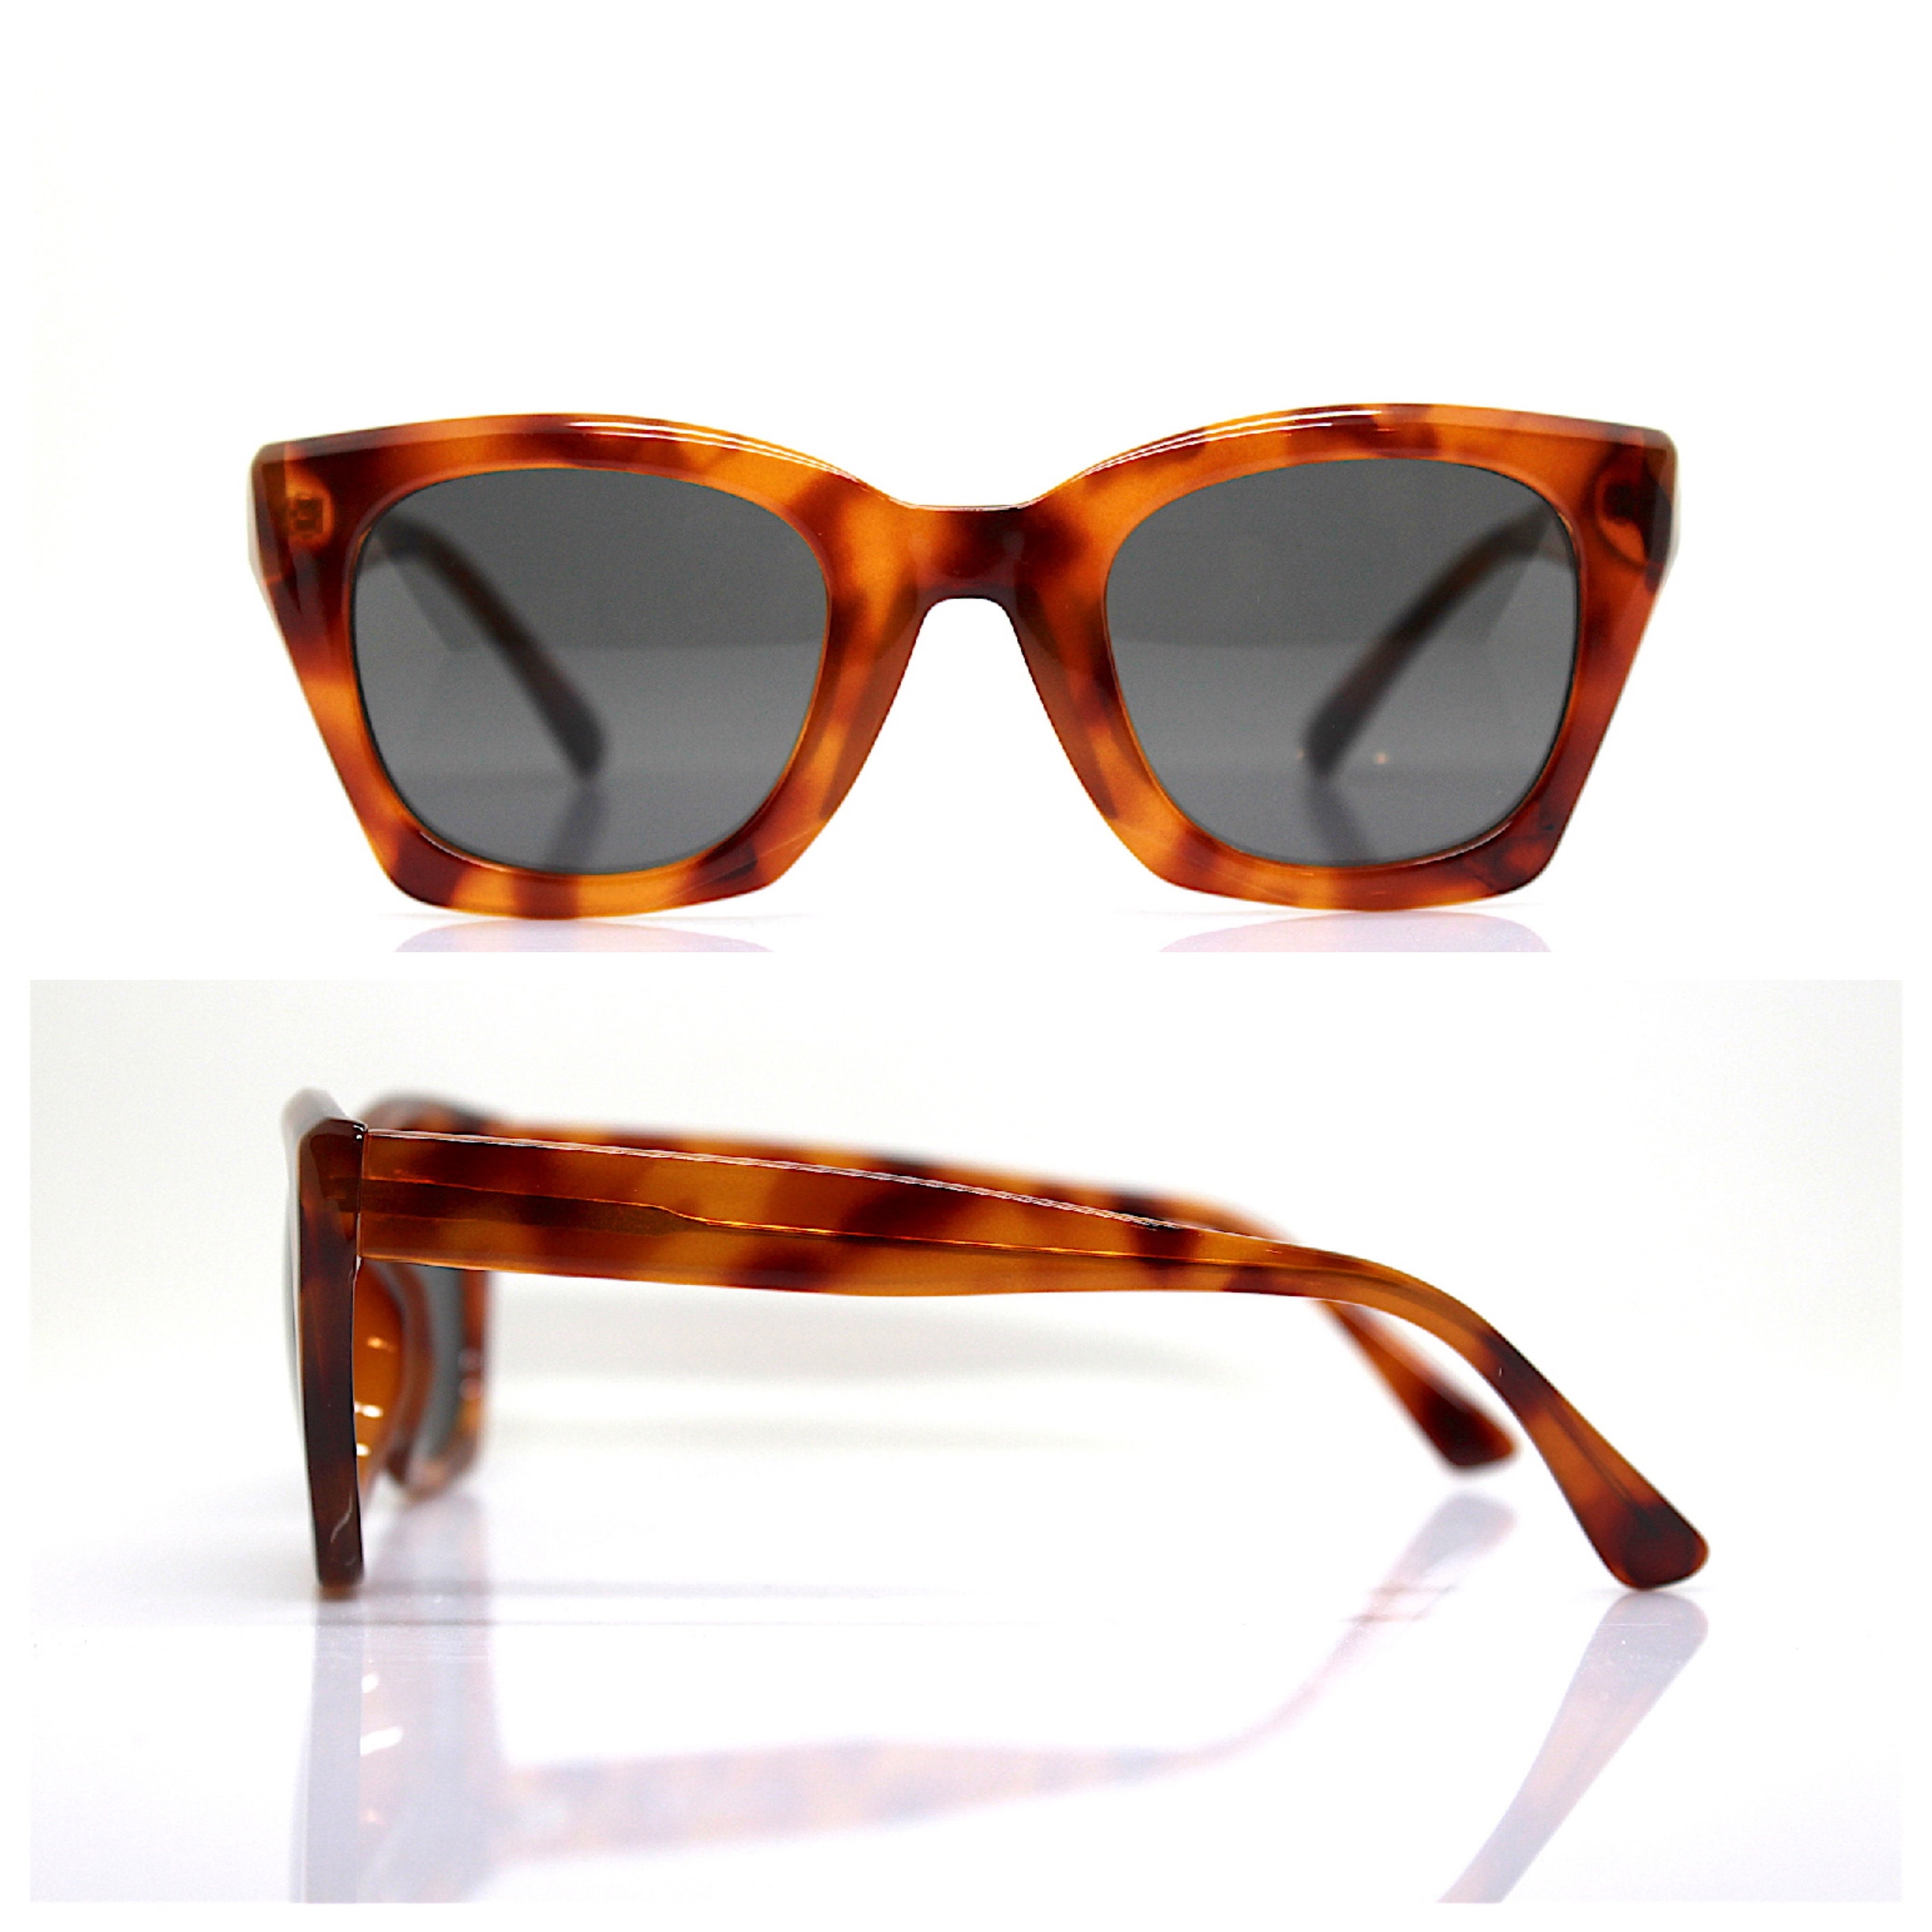 MADE IN ITALY square classic sunglasses woman acetate tortoise blonde ...